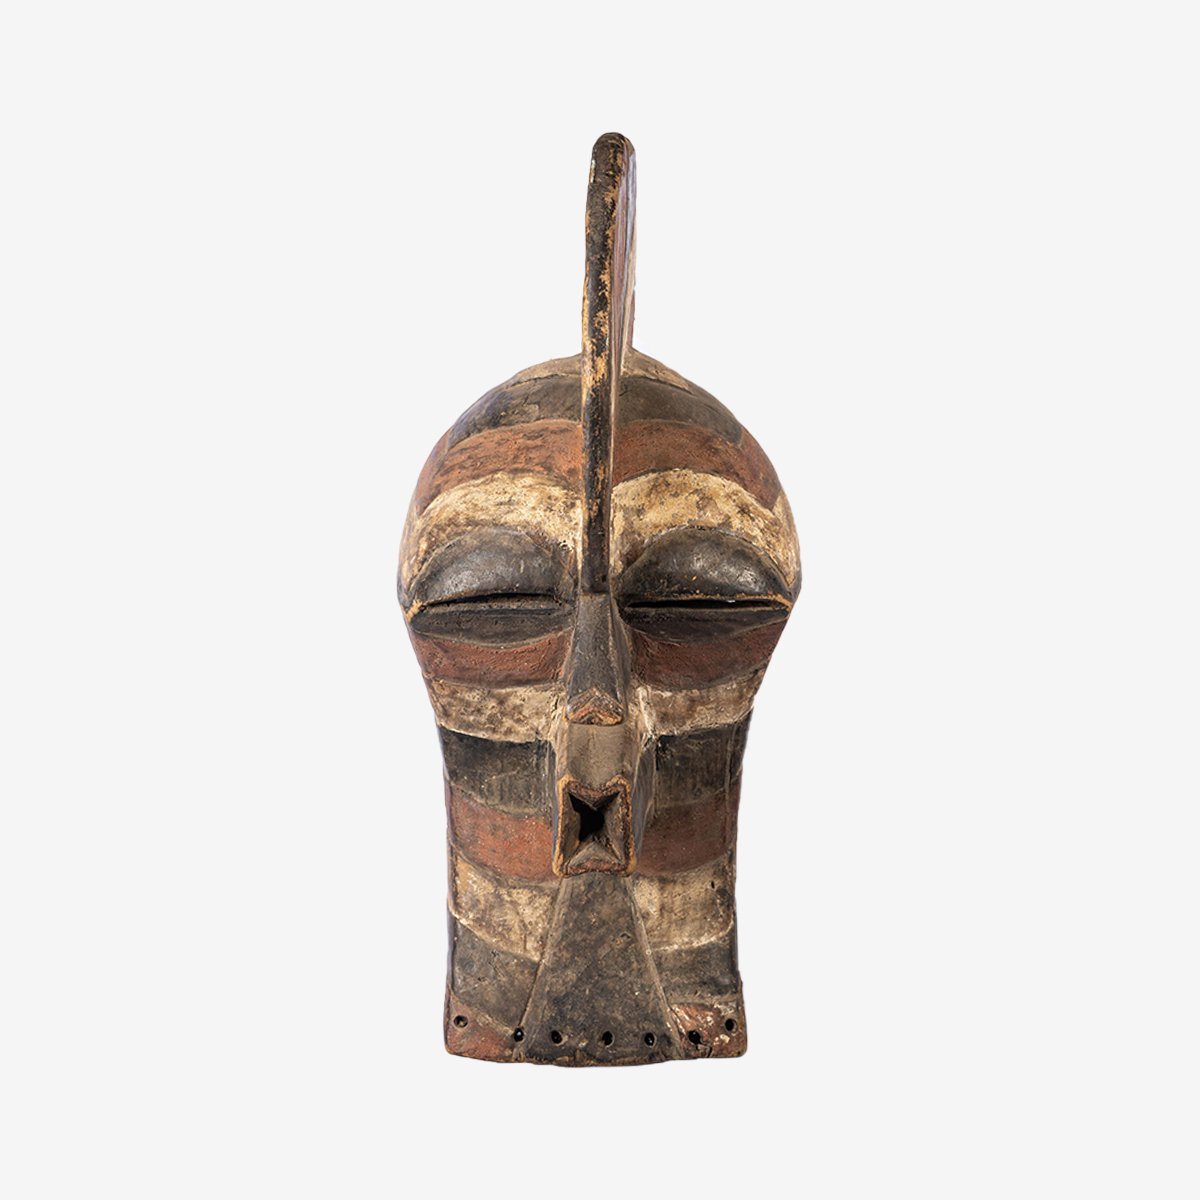 Songye Mask - Authentic African handicrafts | Clothing, bags, painting, toys & more - CULTURE HUB by Muthoni Unchained